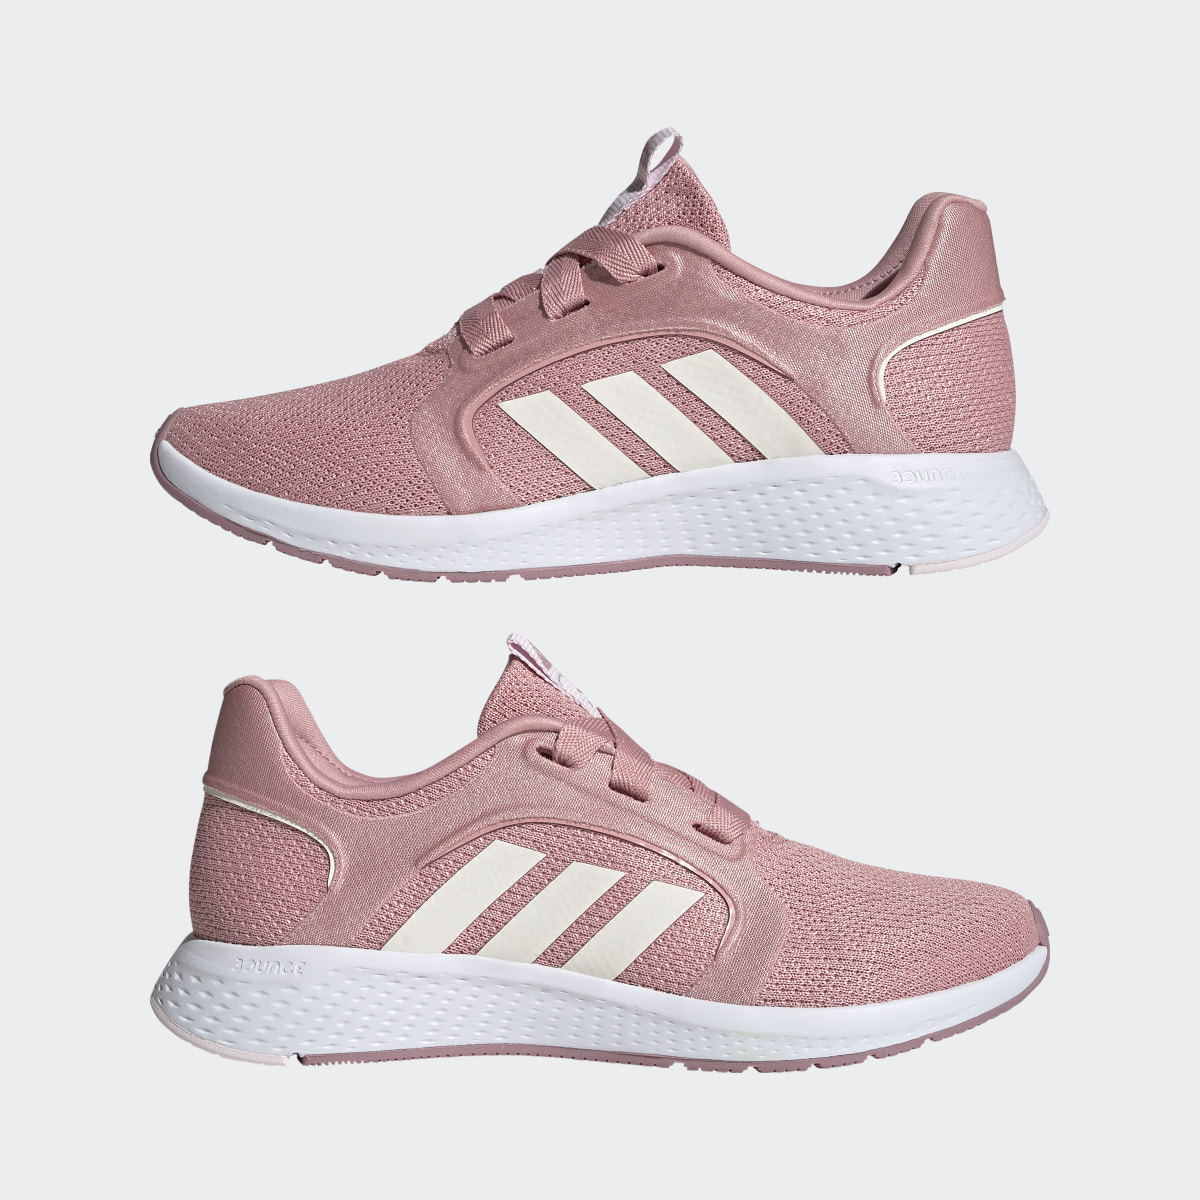 Adidas Edge Lux Shoes. 8